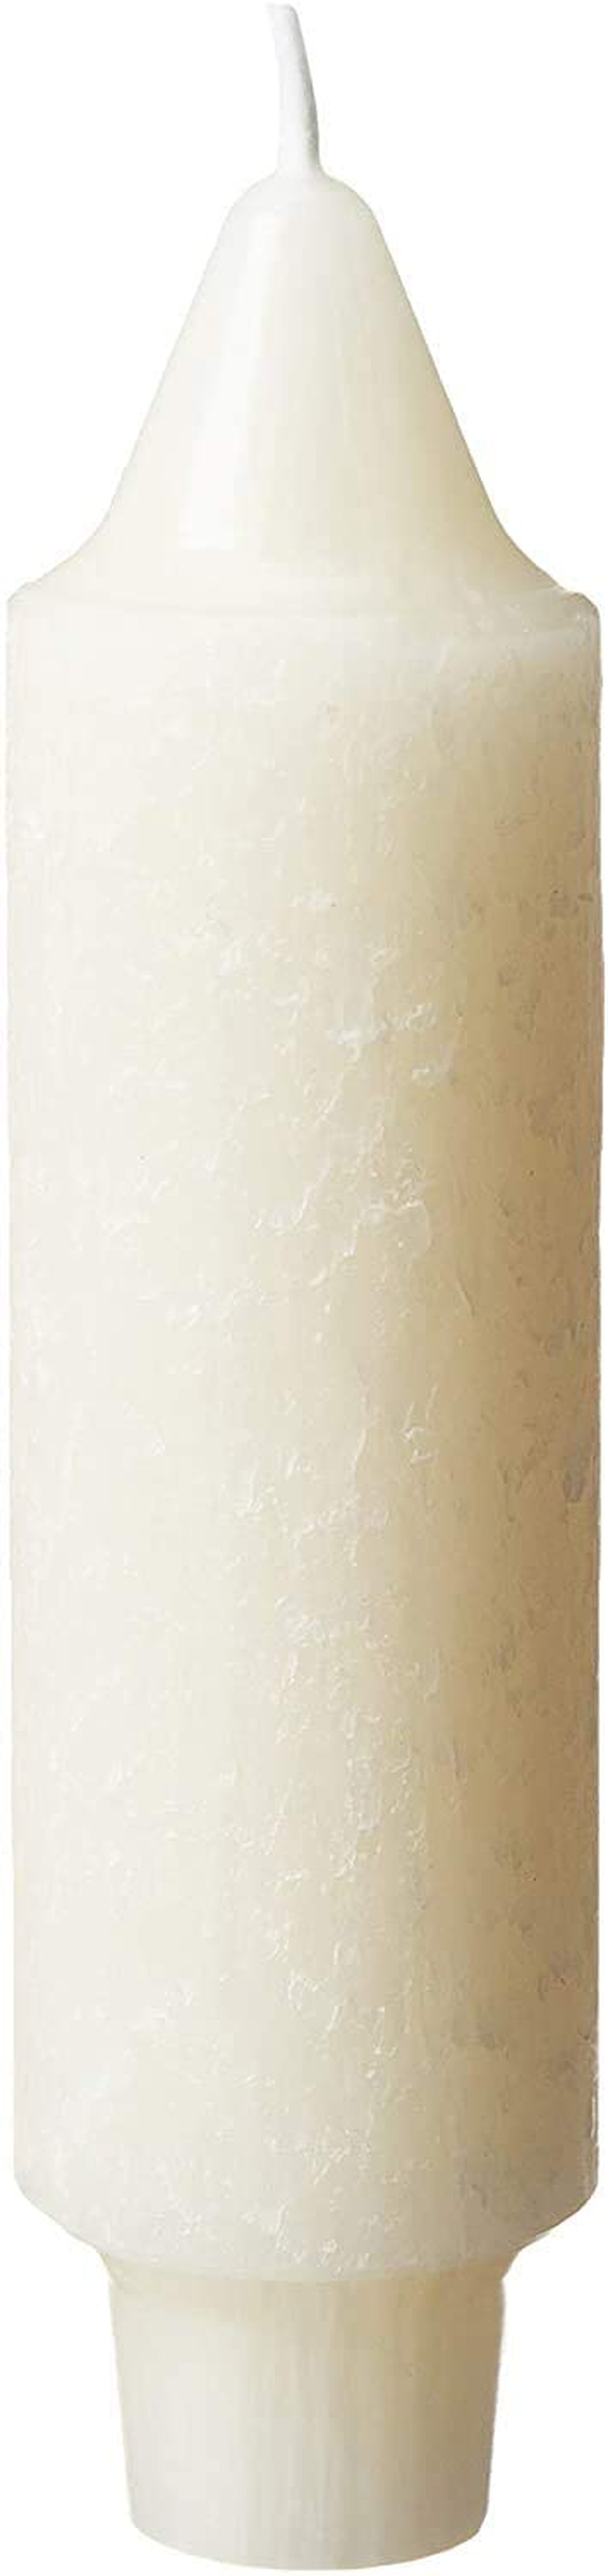 Root Candles 59517 Unscented Timberline Collenette 5-Inch Dinner Candles, 8-Count, Ivory